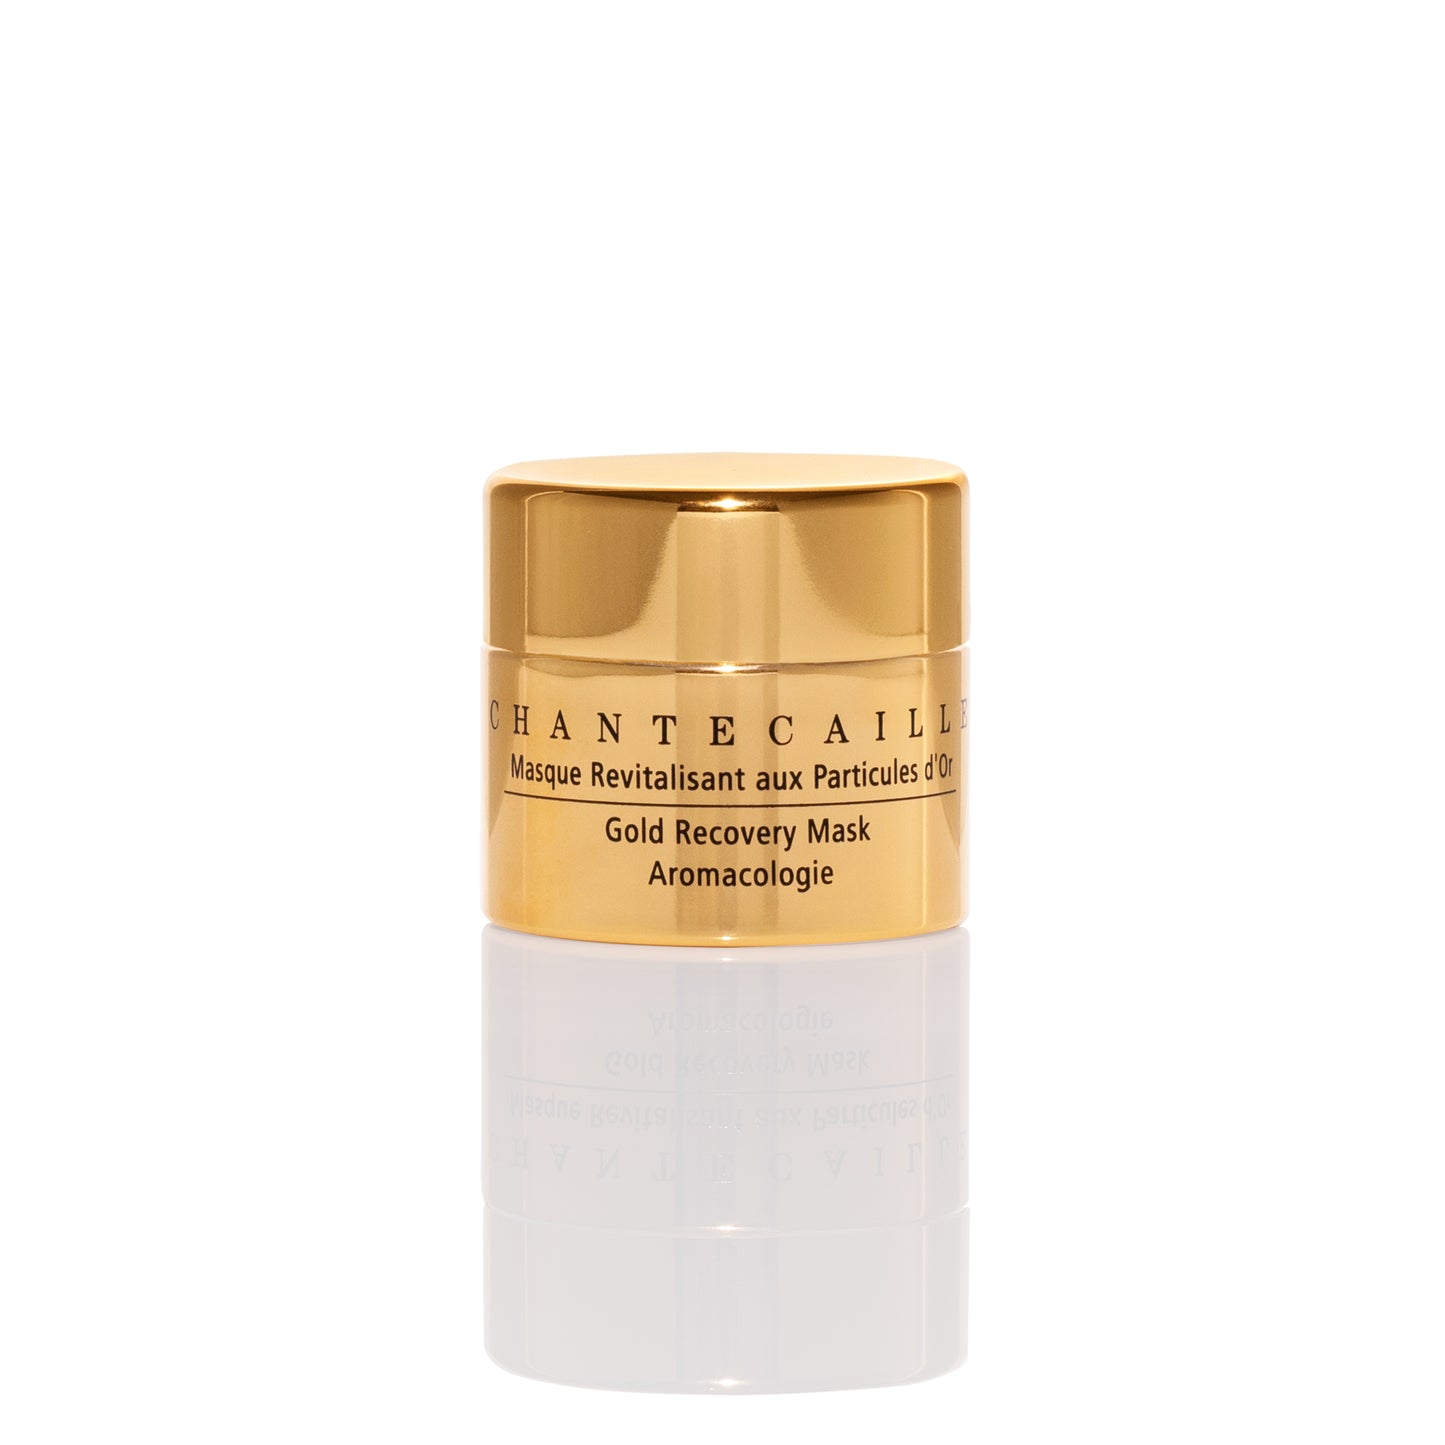 Gold Recovery Mask 5ml Gift